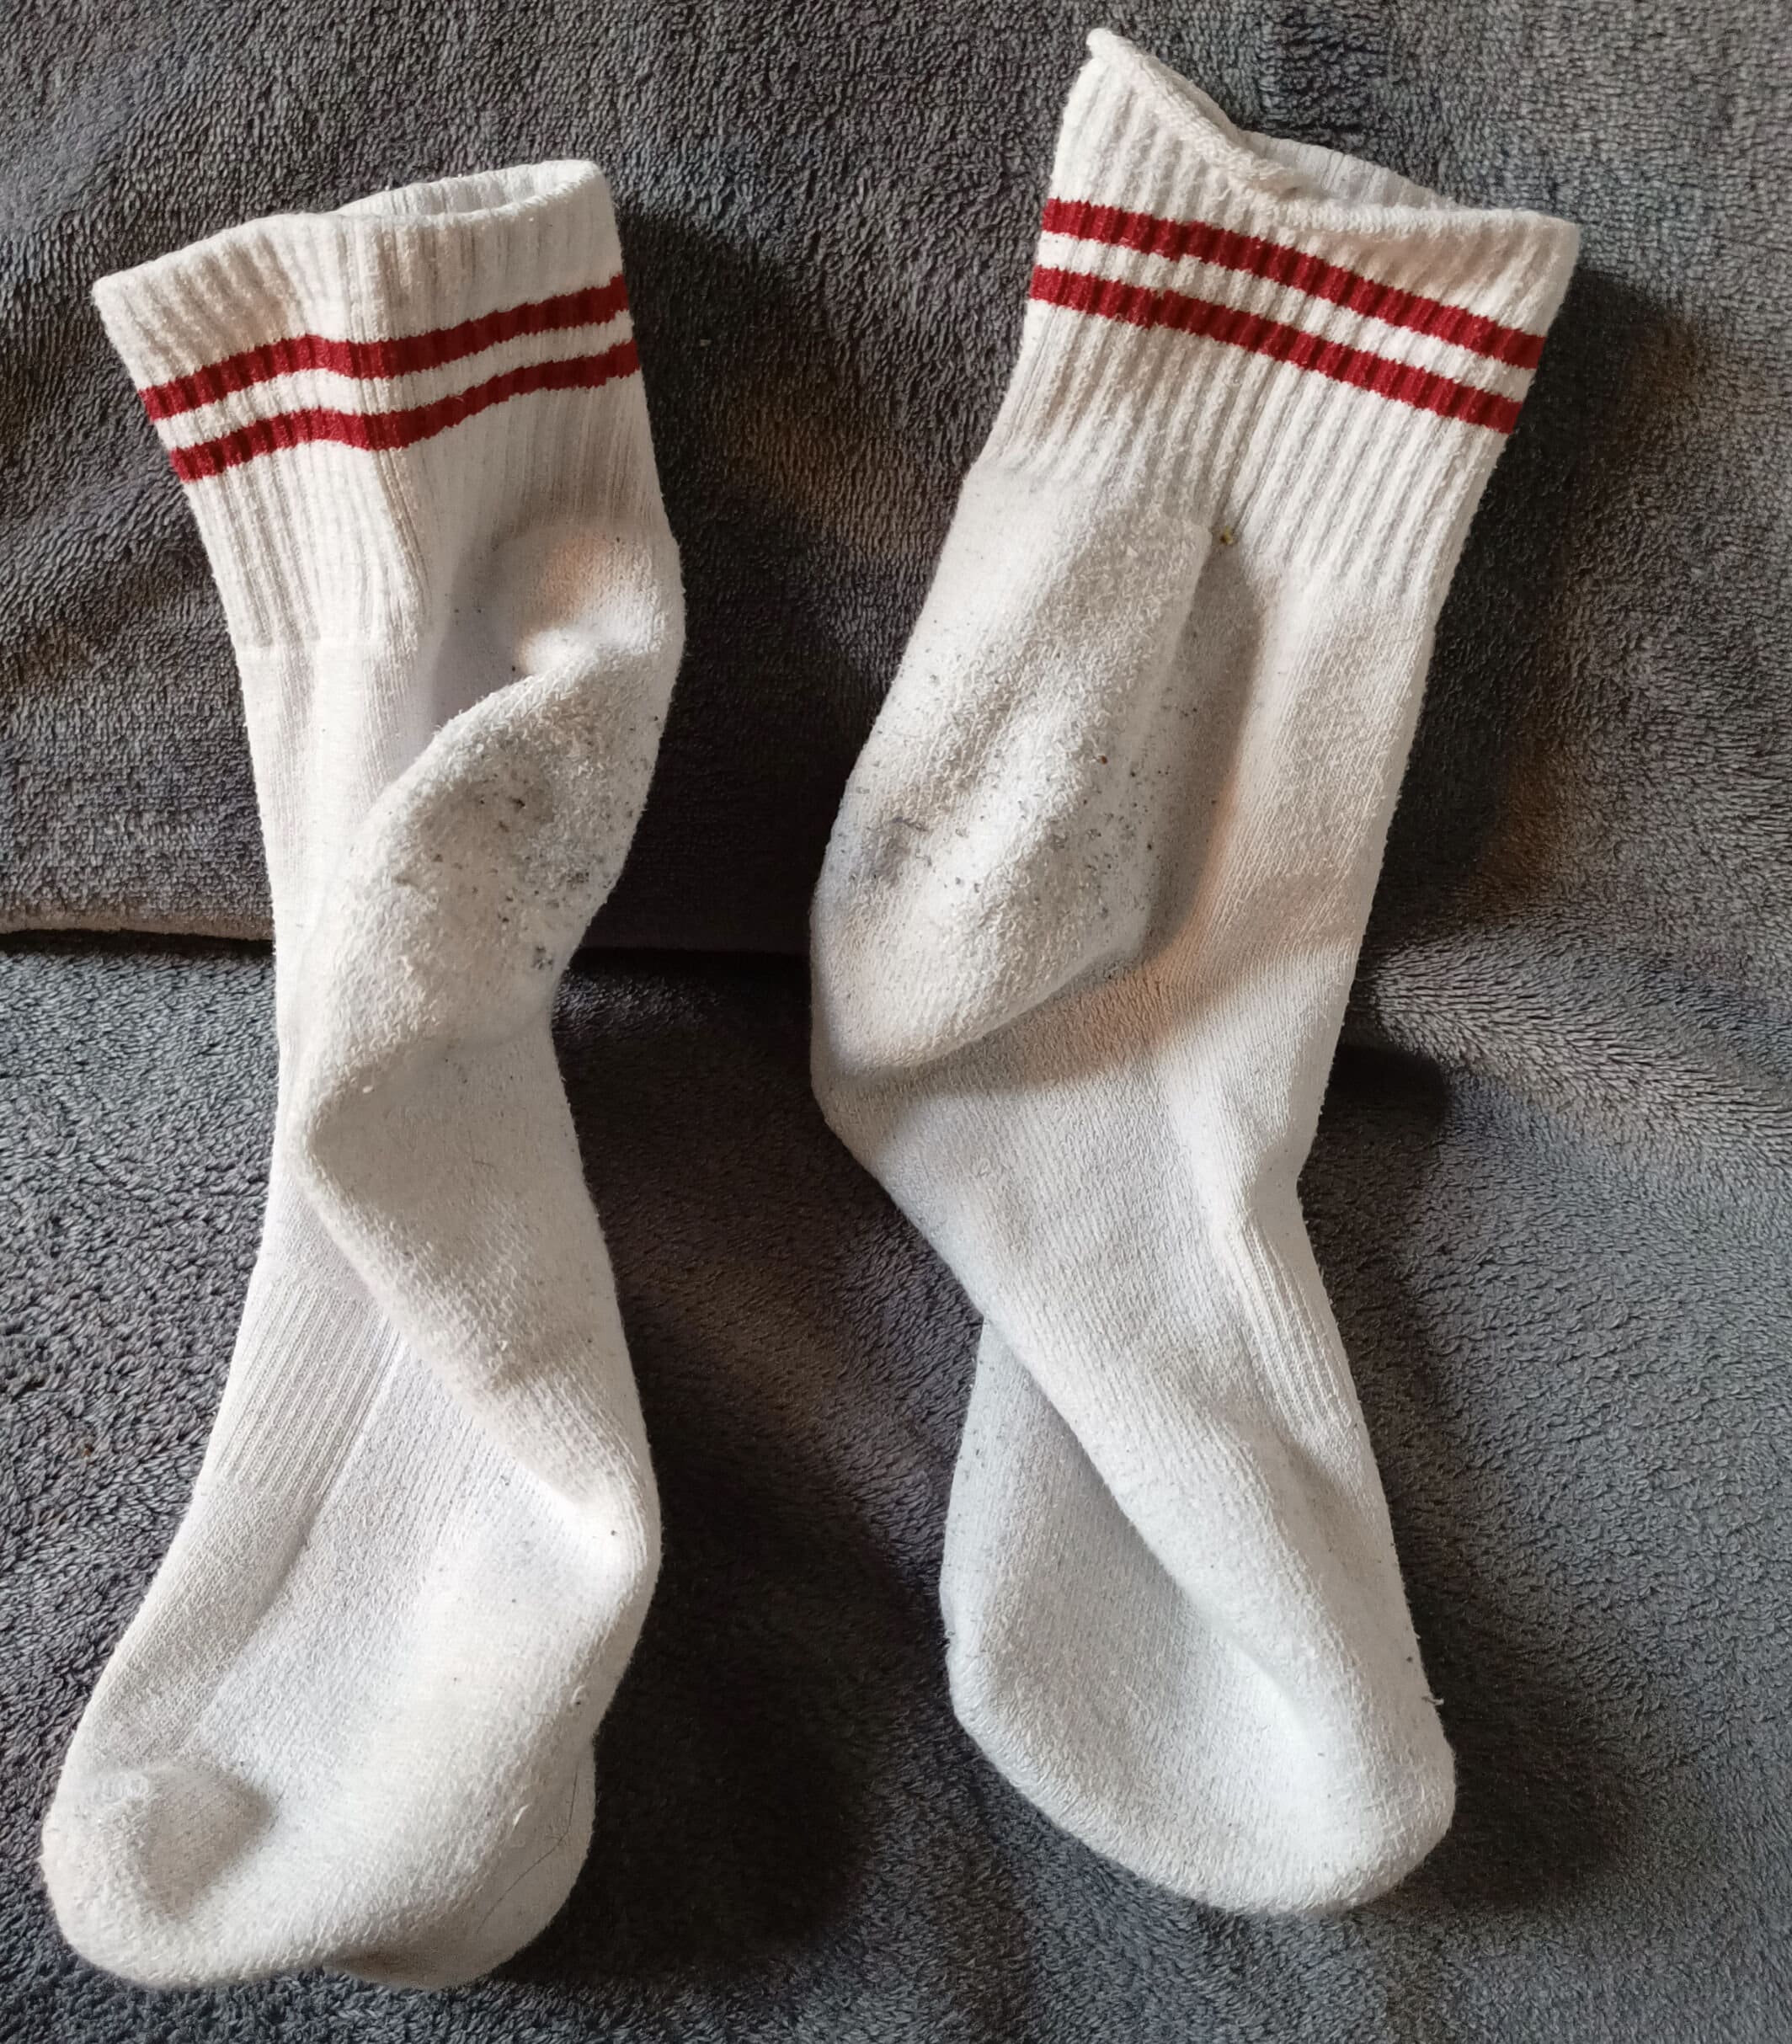 Cash in Your Closet: How to Sell Used Socks for Extra Money